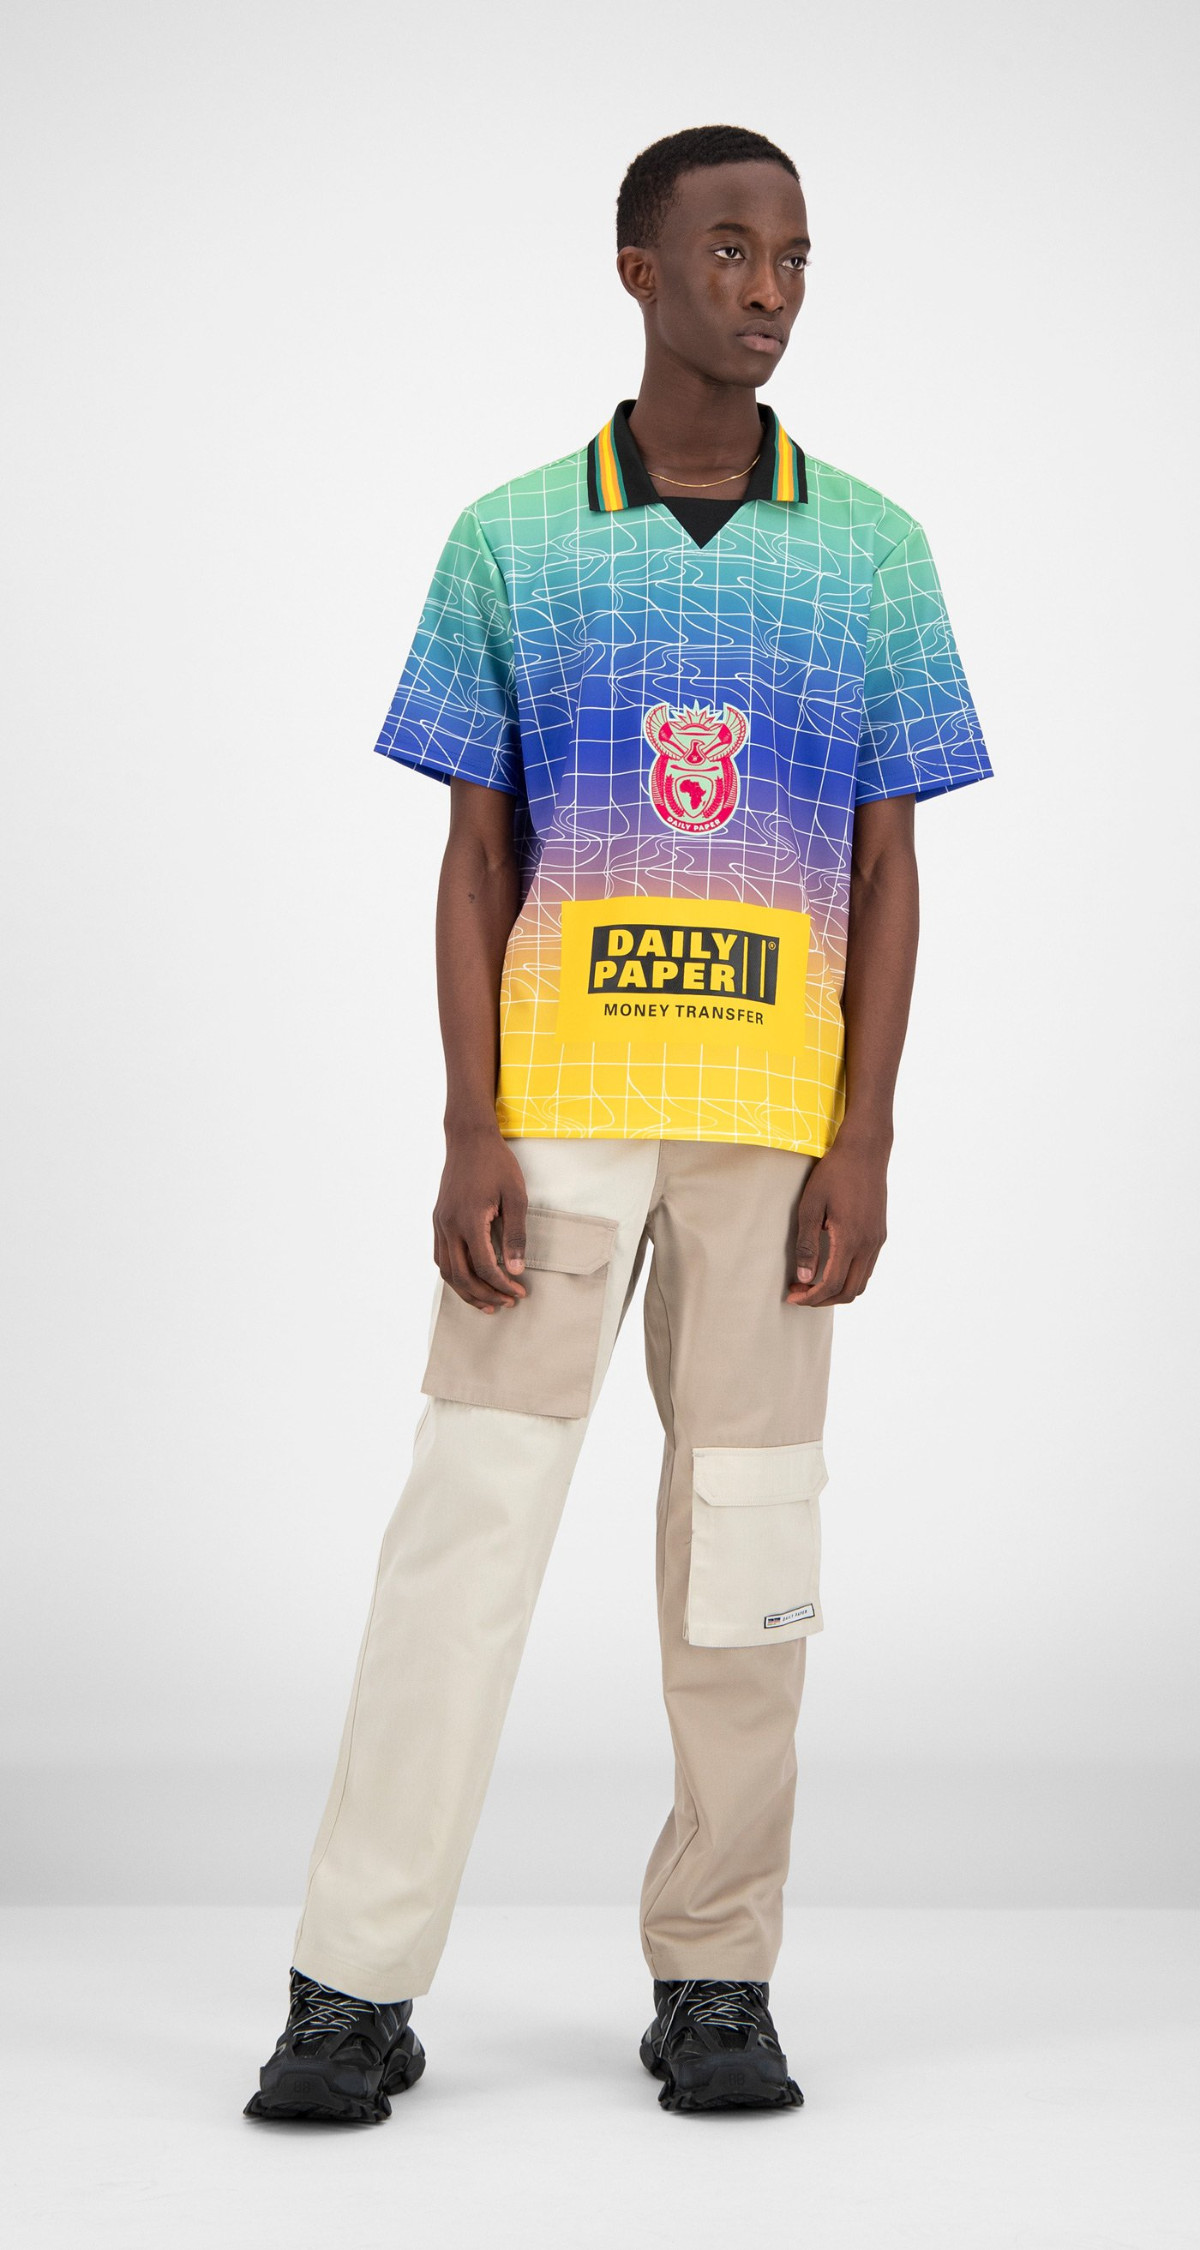 Daily Paper Tap Masego To Style Their Retro Inspired Football Shirts ...